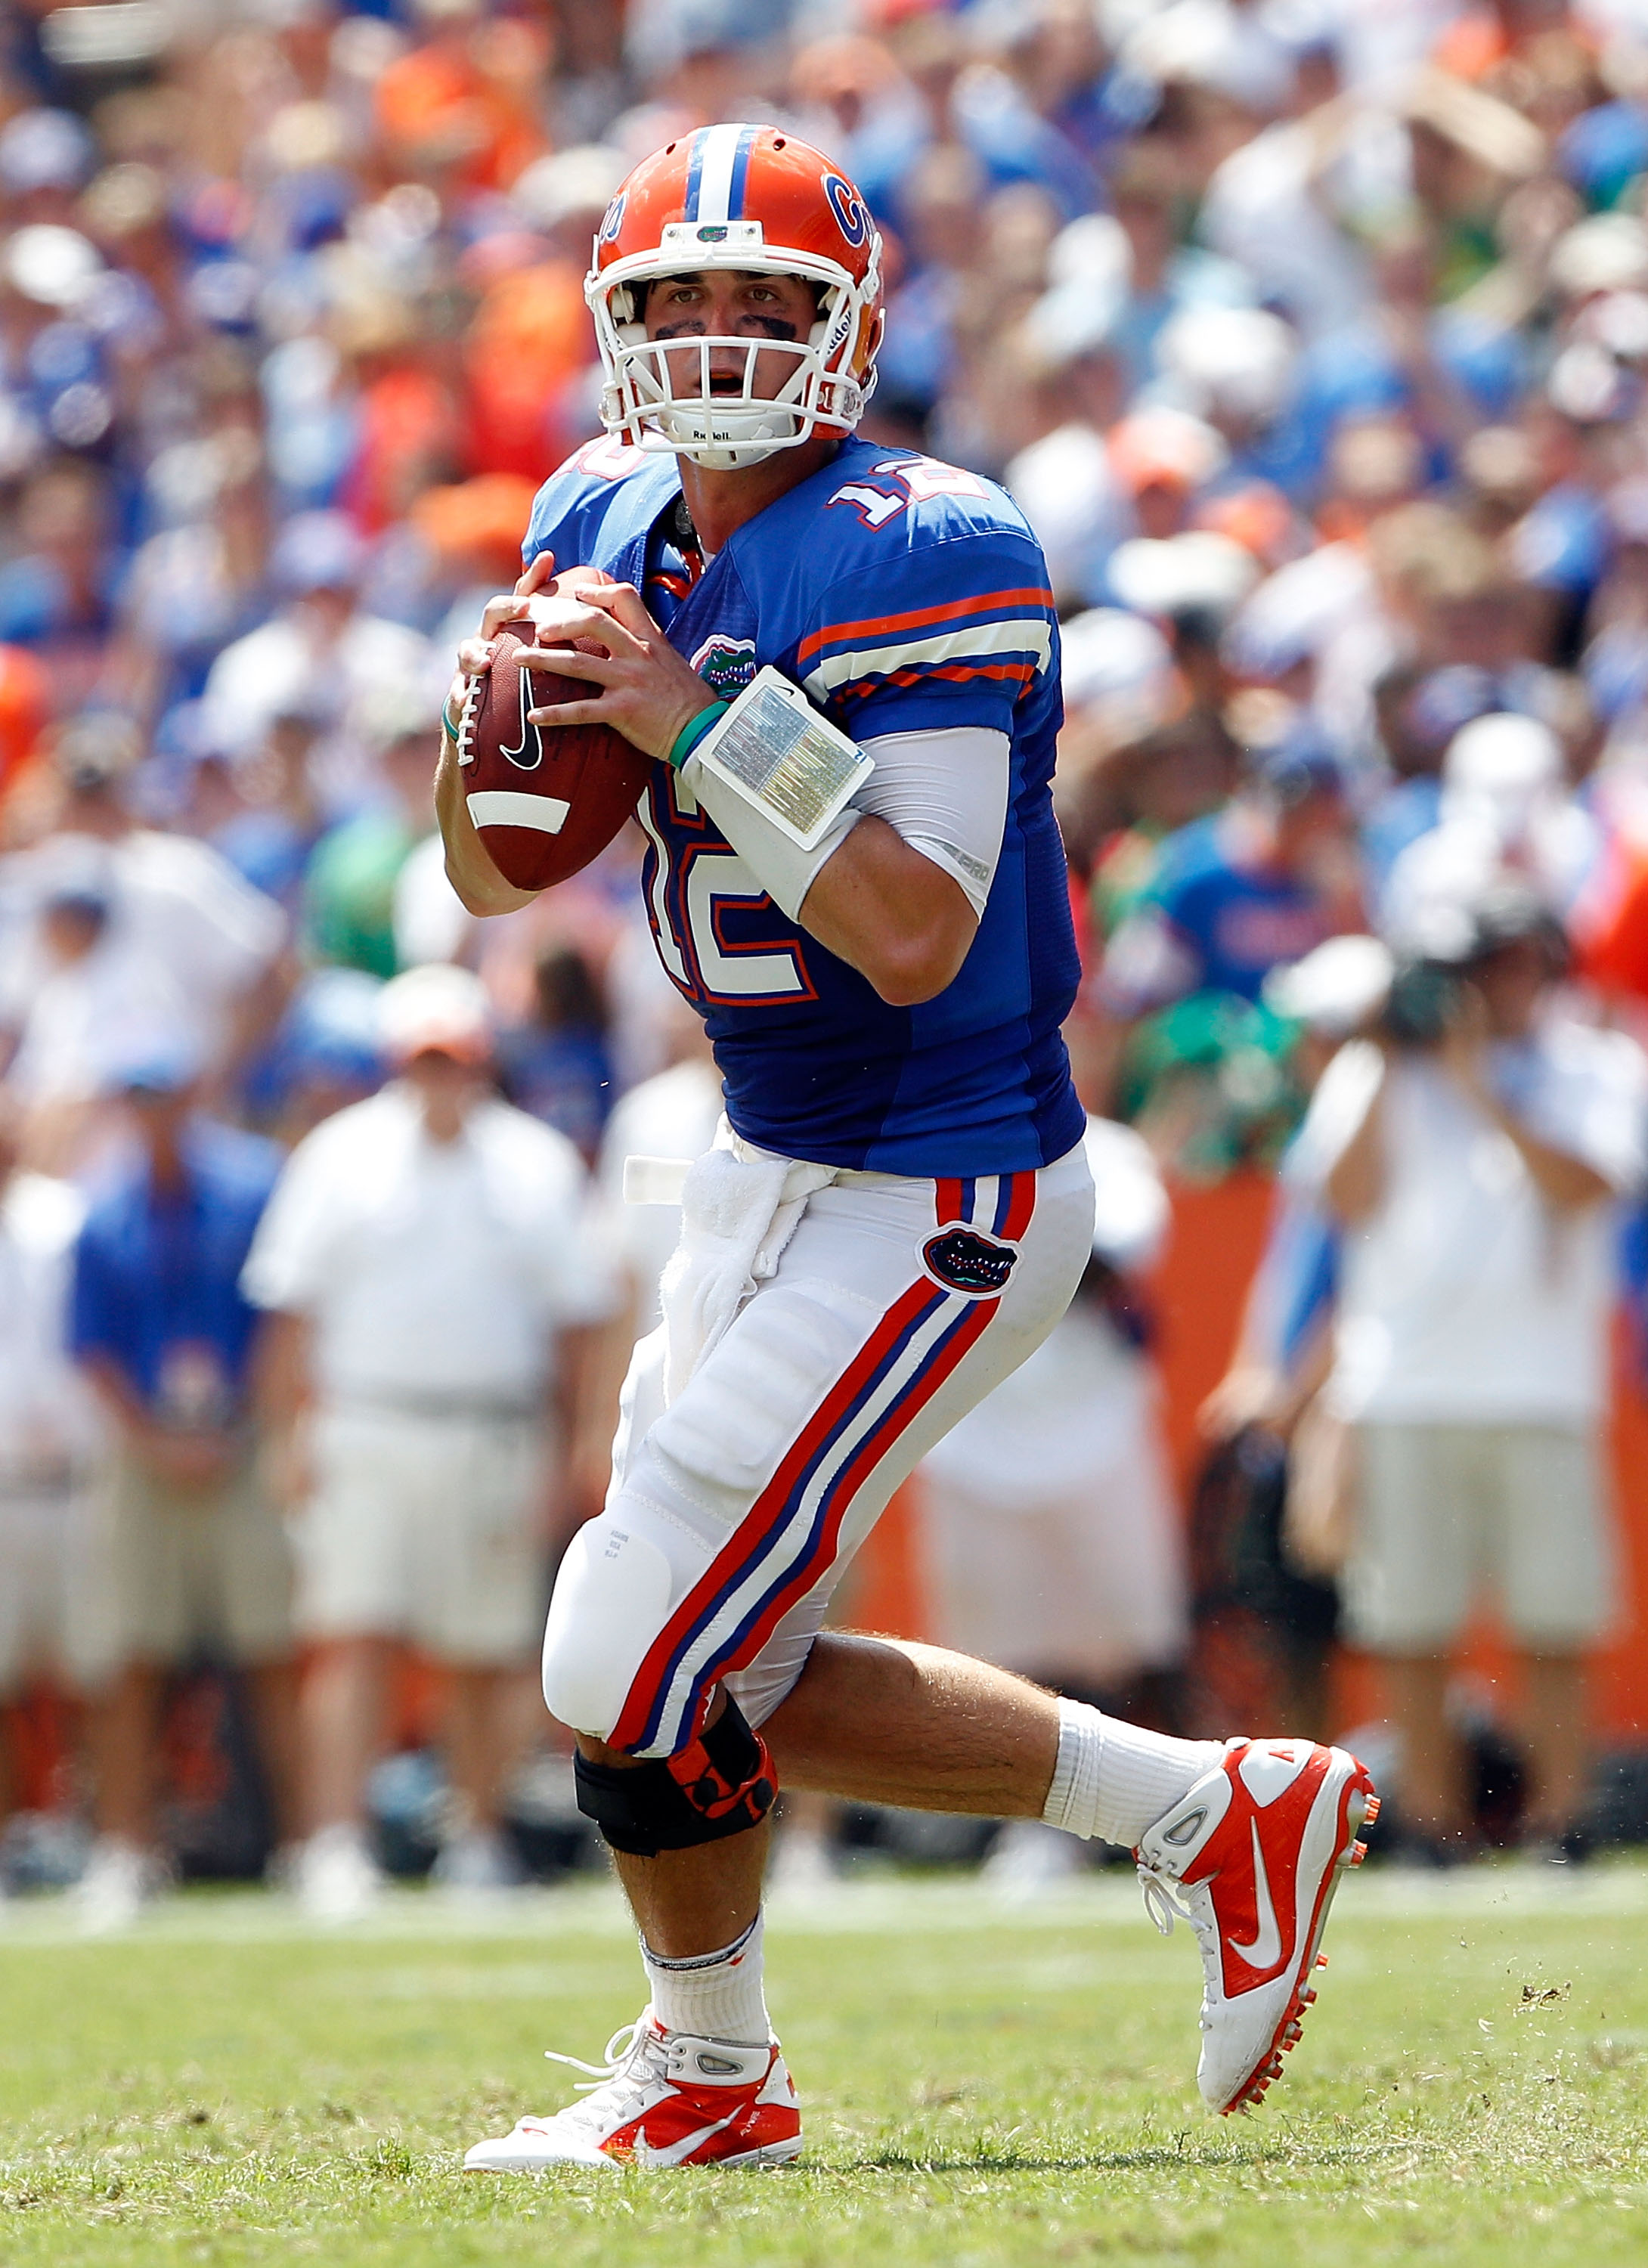 GAINESVILLE, FL - SEPTEMBER 11:  Quarterback John Brantley #12 of the Florida Gators attempts a pass during a game against the South Florida Bulls at Ben Hill Griffin Stadium on September 11, 2010 in Gainesville, Florida.  (Photo by Sam Greenwood/Getty Im